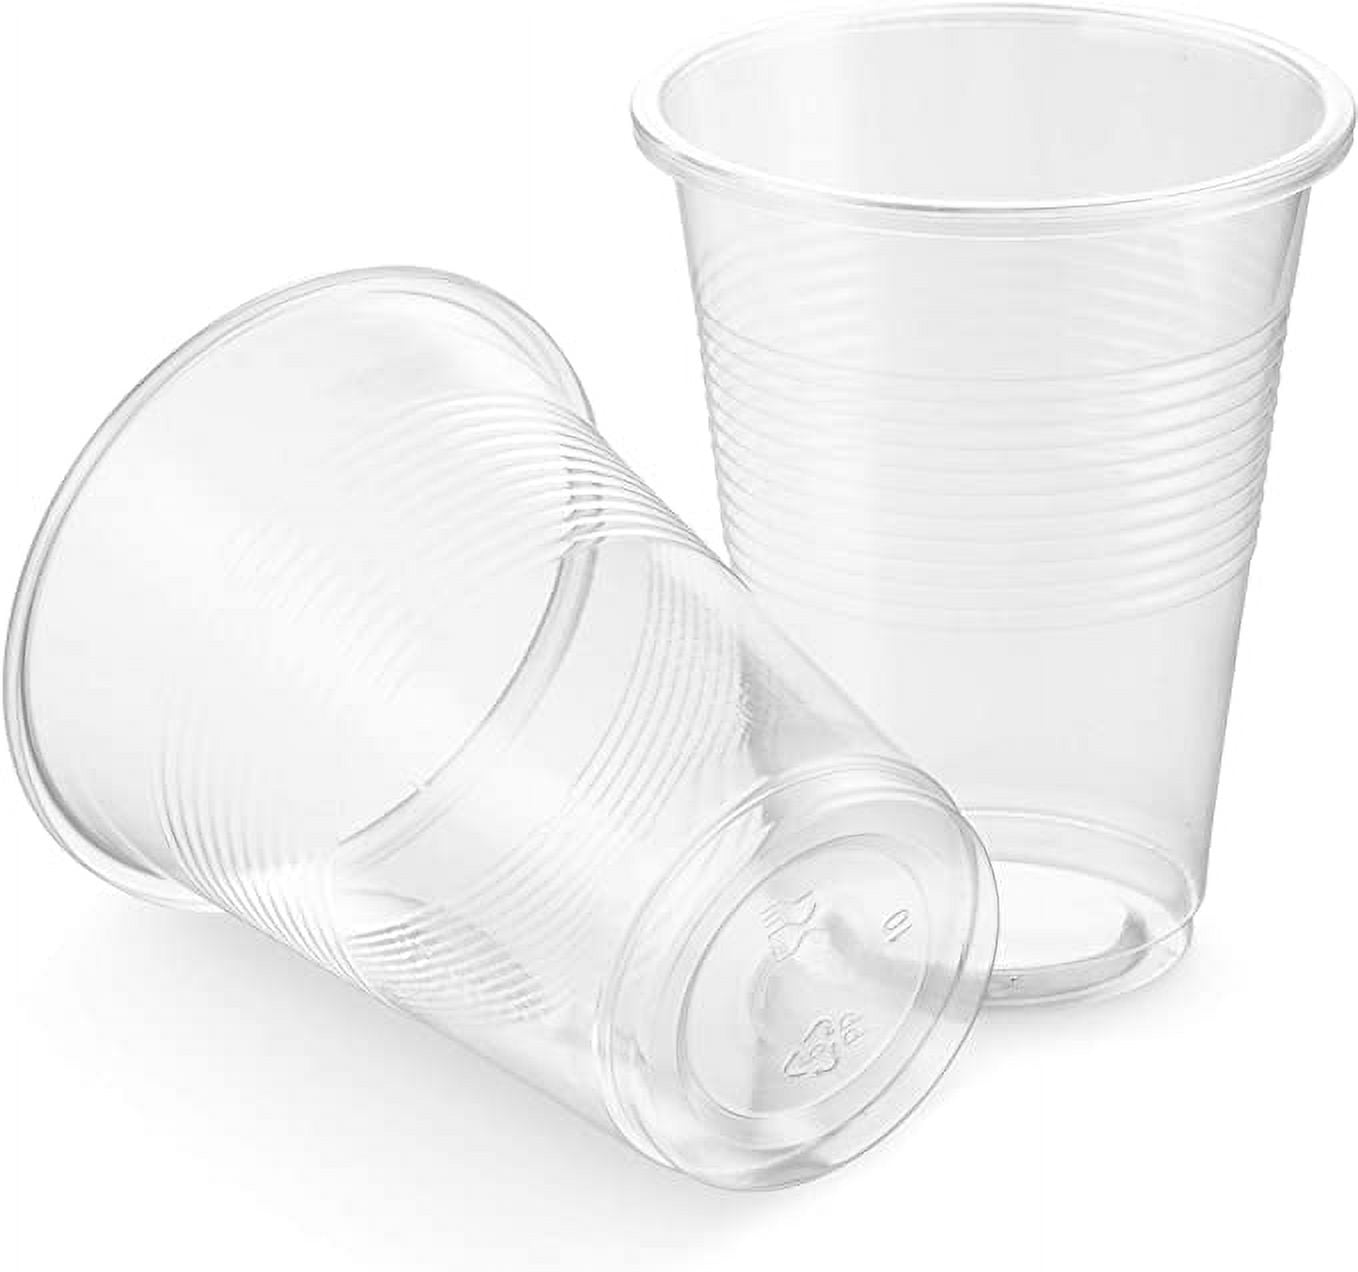 Plastic Cups Bulk Disposable Clear Cups 7 oz - 1200 Count Case BPA-Free -  Good For Cold Drinks, Part…See more Plastic Cups Bulk Disposable Clear Cups